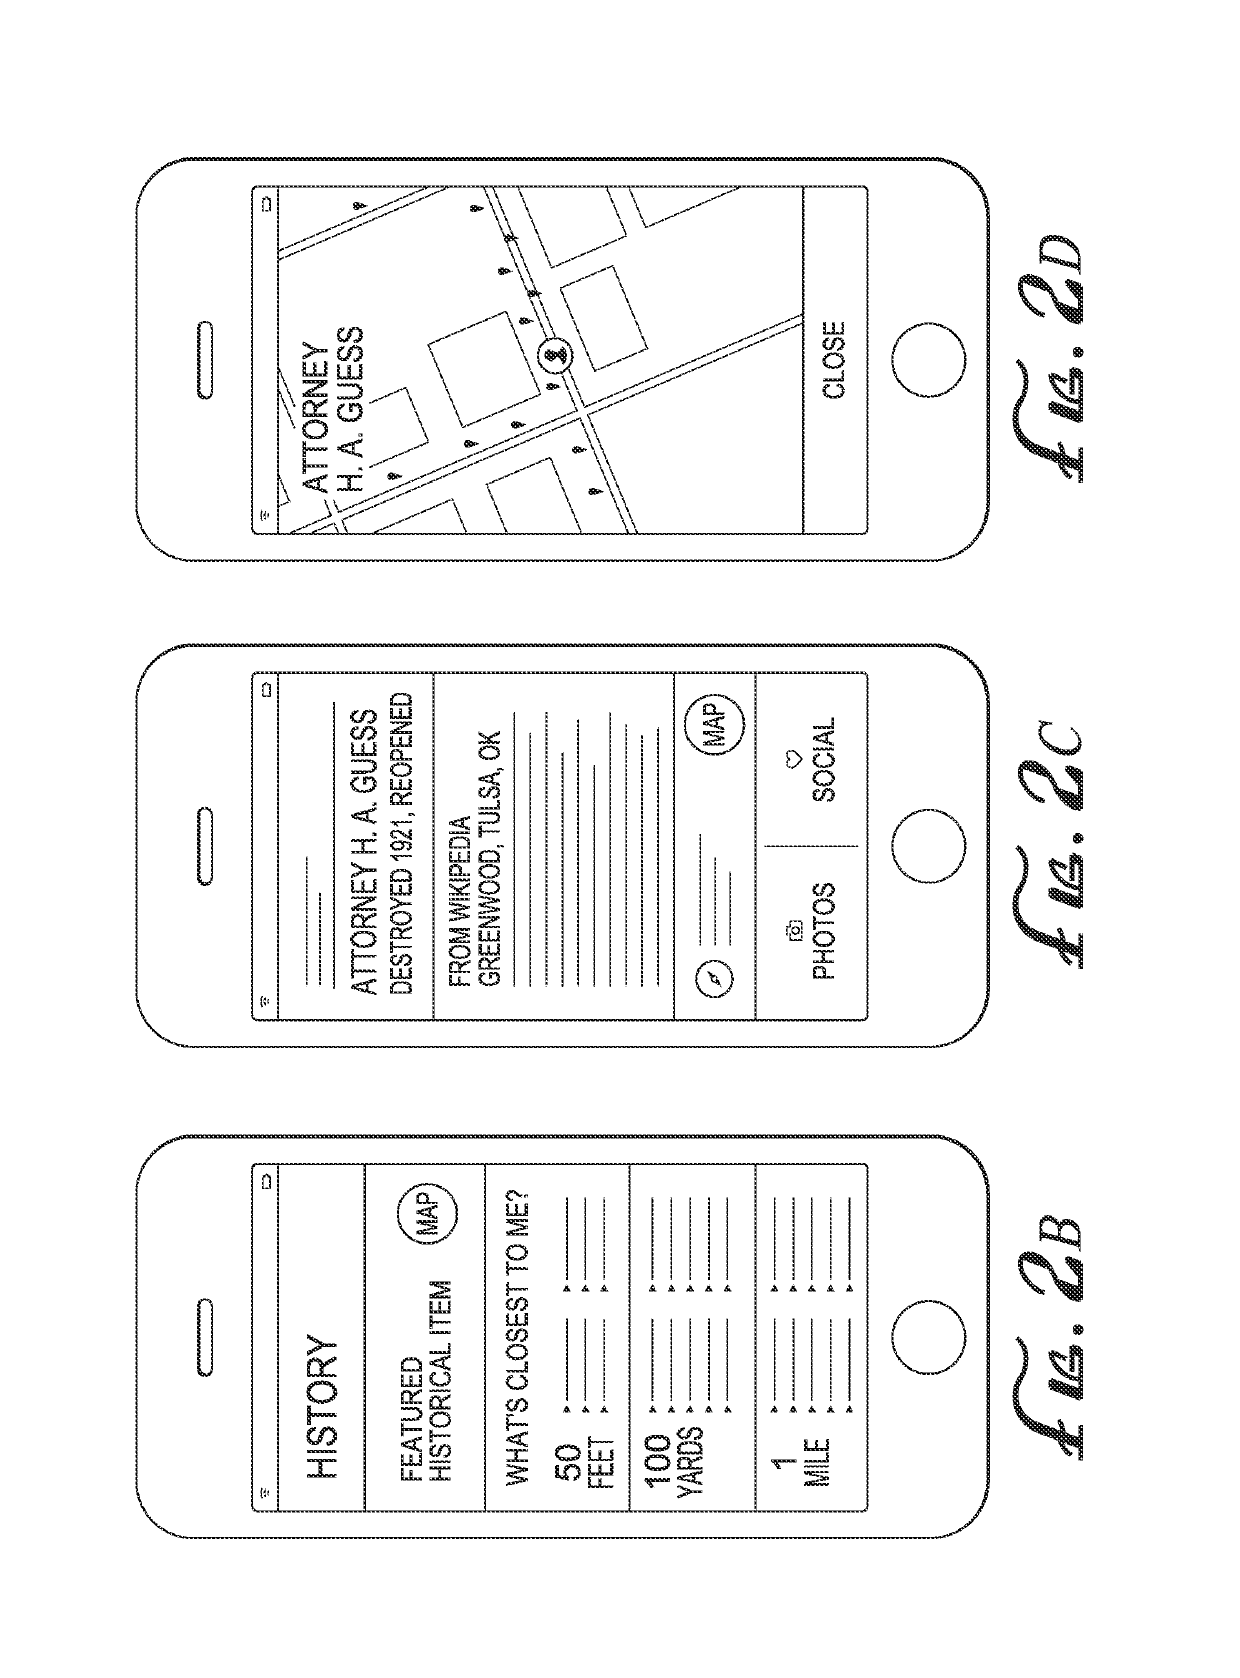 Location based mobile device system and application for providing artifact tours